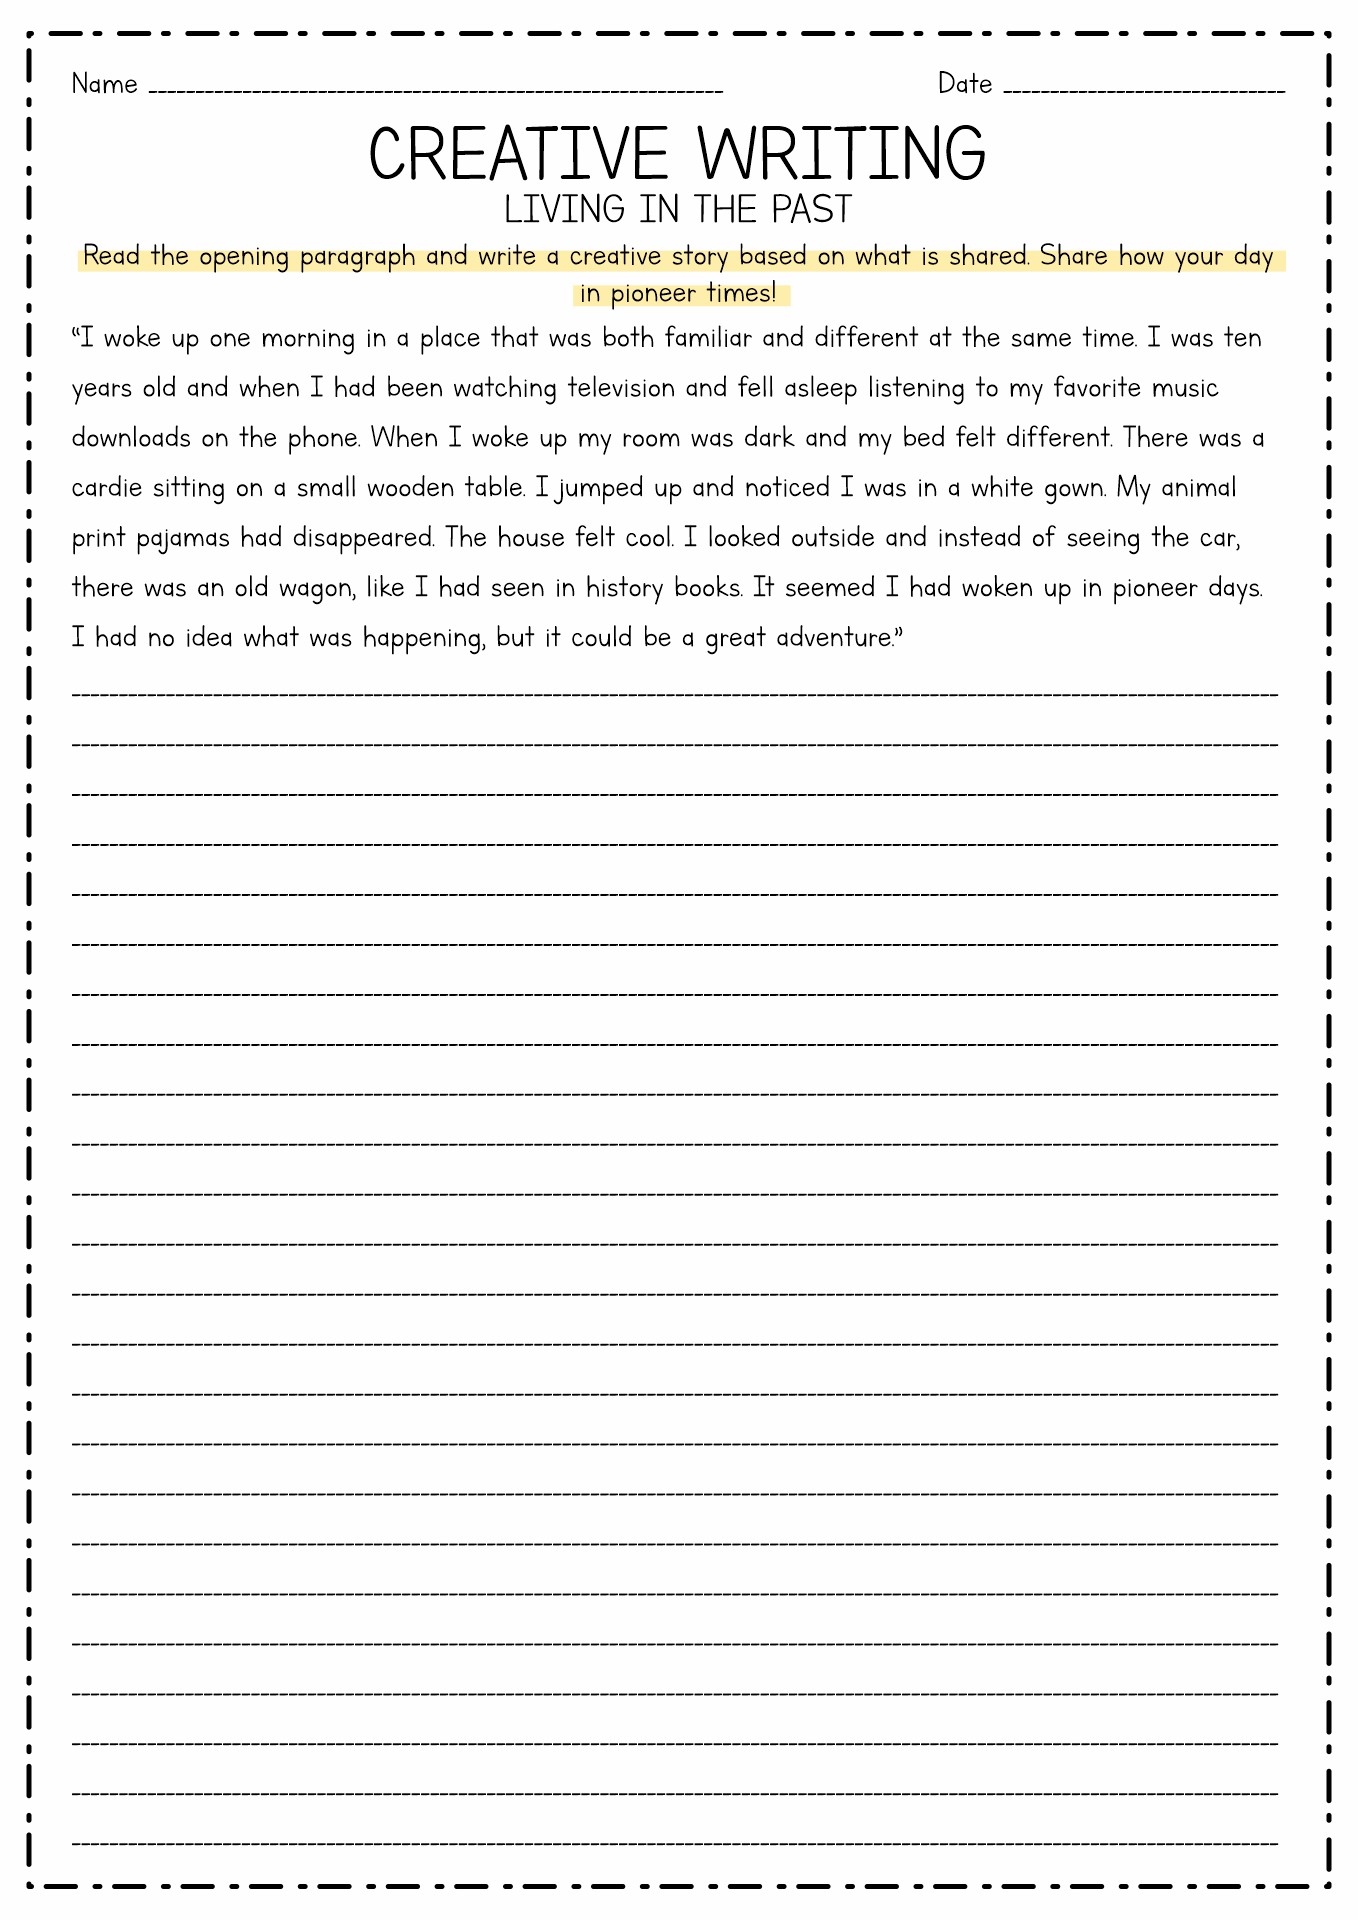 18 Best Images of 4th Grade Essay Writing Worksheets - Free Creative ...